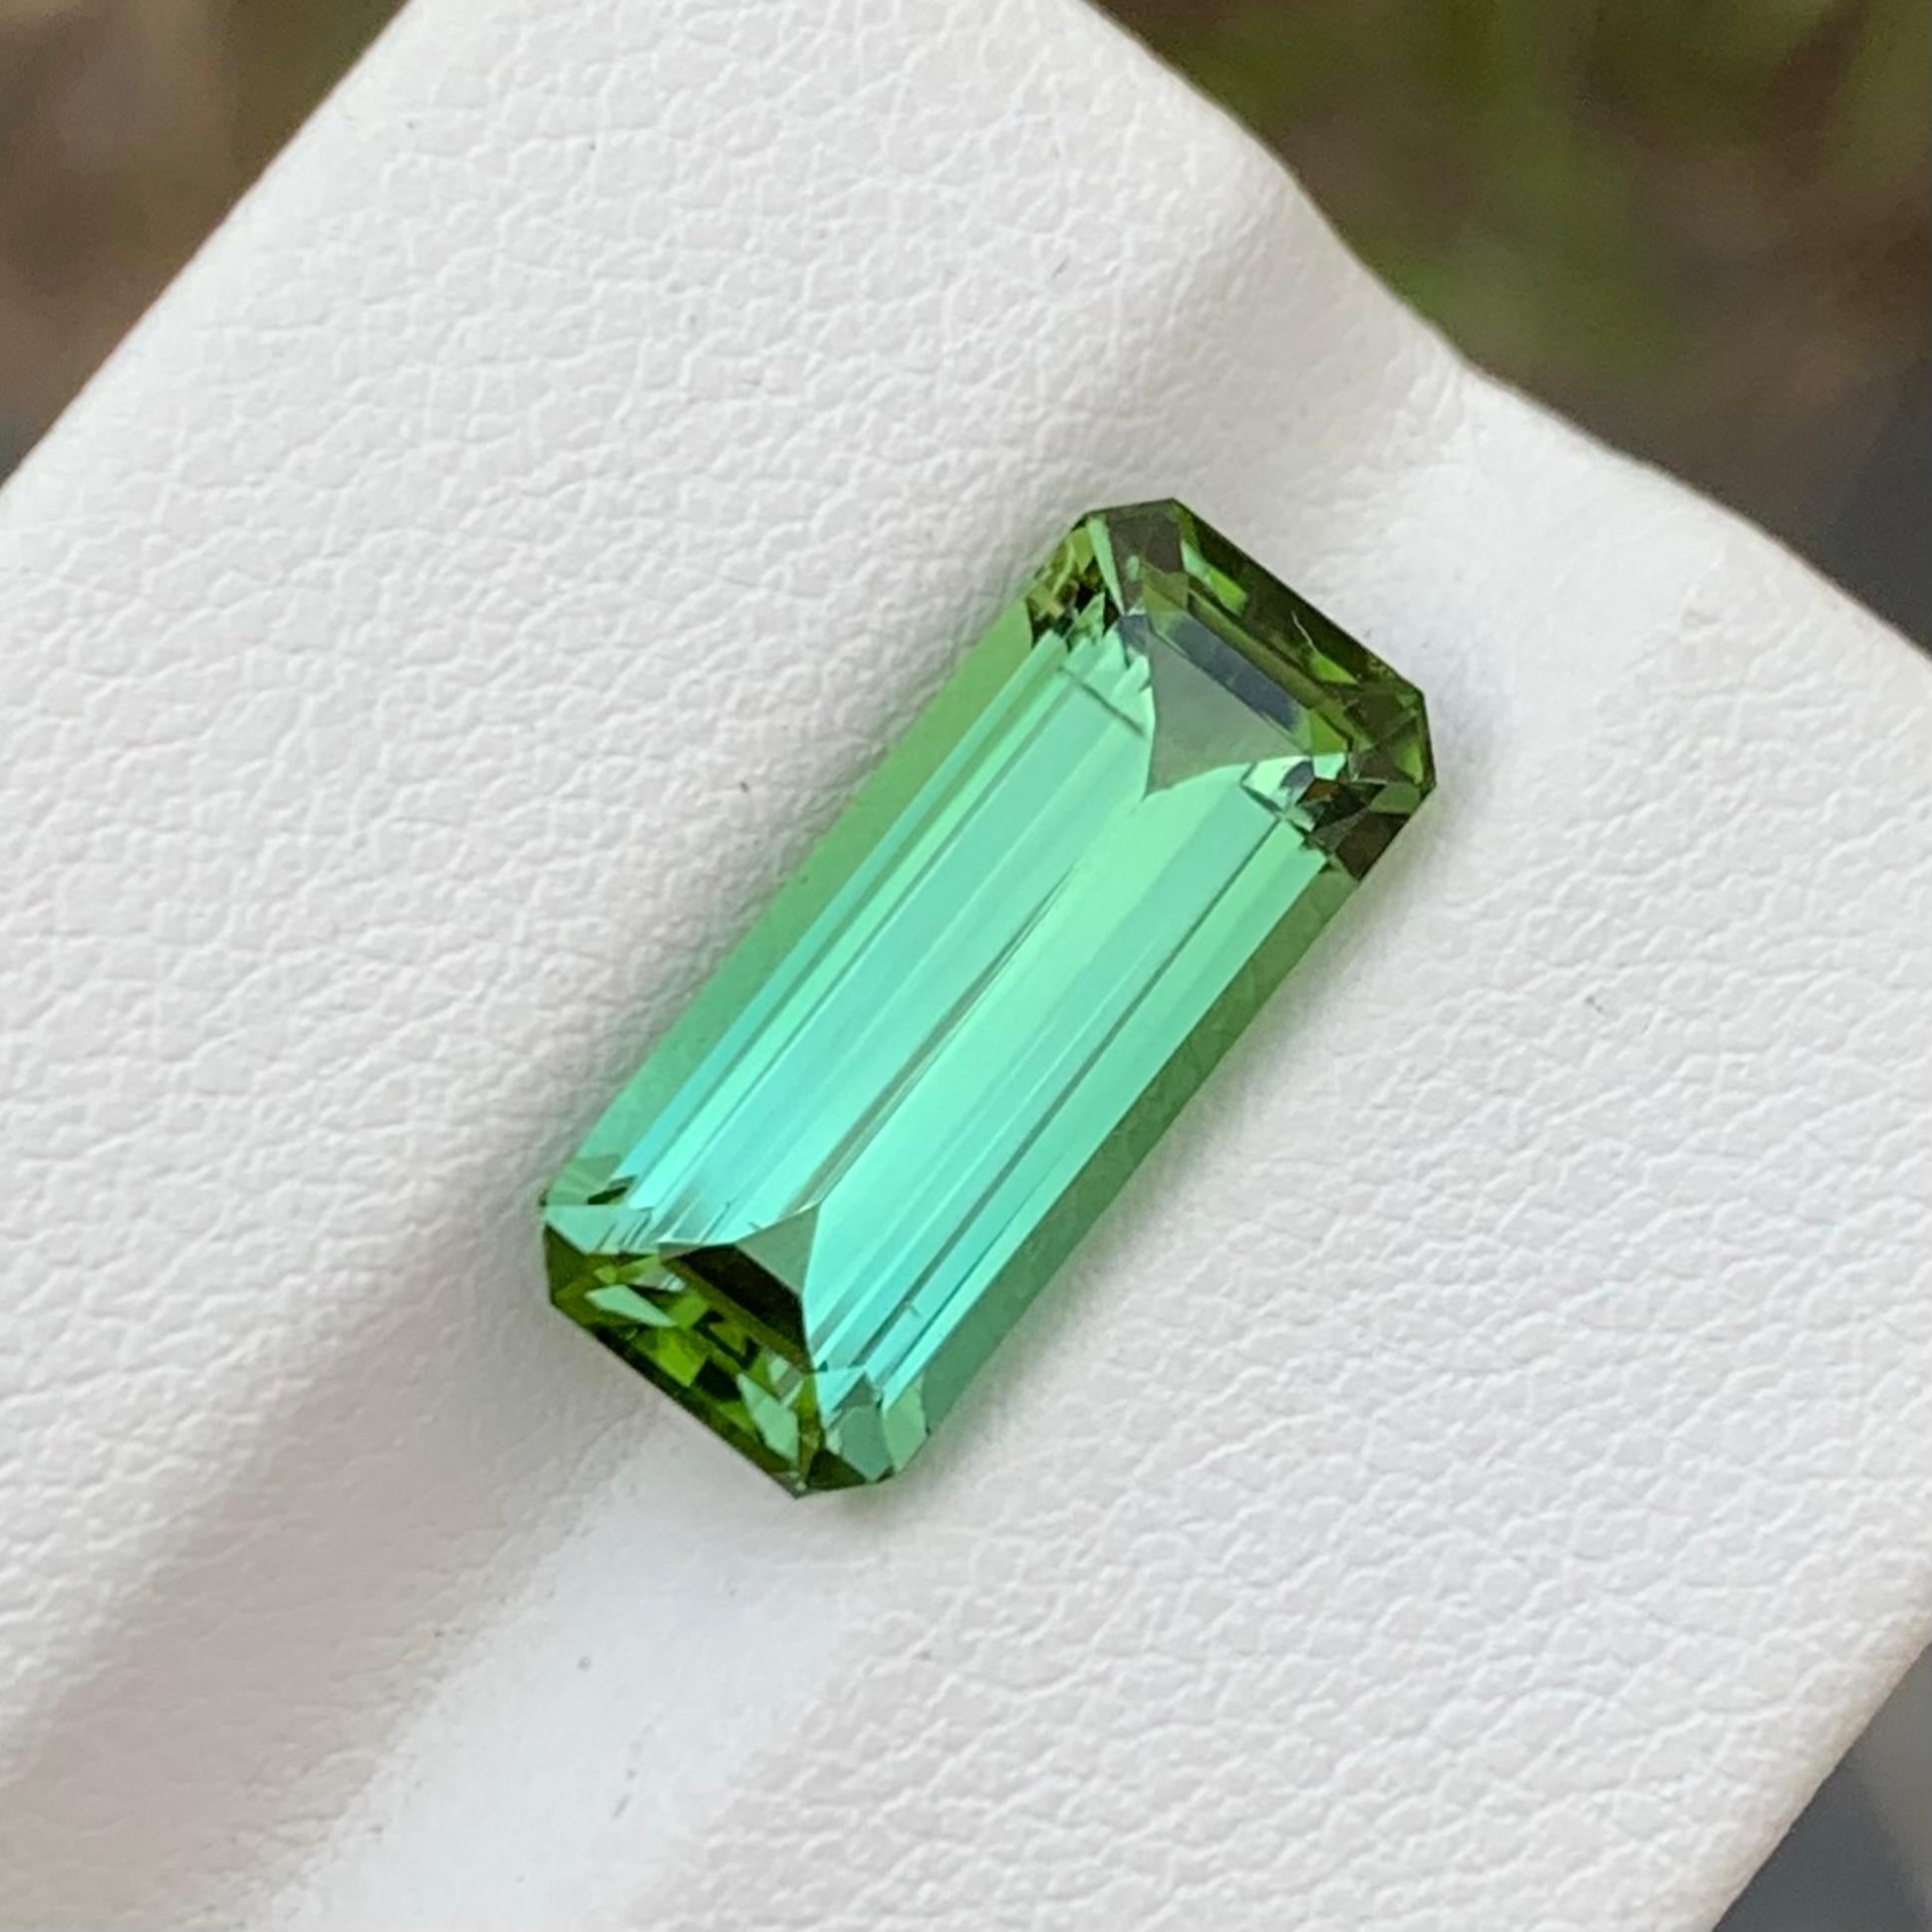 Loose Tourmaline 
Weight: 5.95 Carats 
Dimension: 15.5 x 6.9 x 6 Mm 
Colour: Mint Green 
Shape: Long Emerald 
Treatment: None
Certificate: On Demand 

Mint green tourmaline, a variety of the mineral tourmaline, captivates with its refreshing and